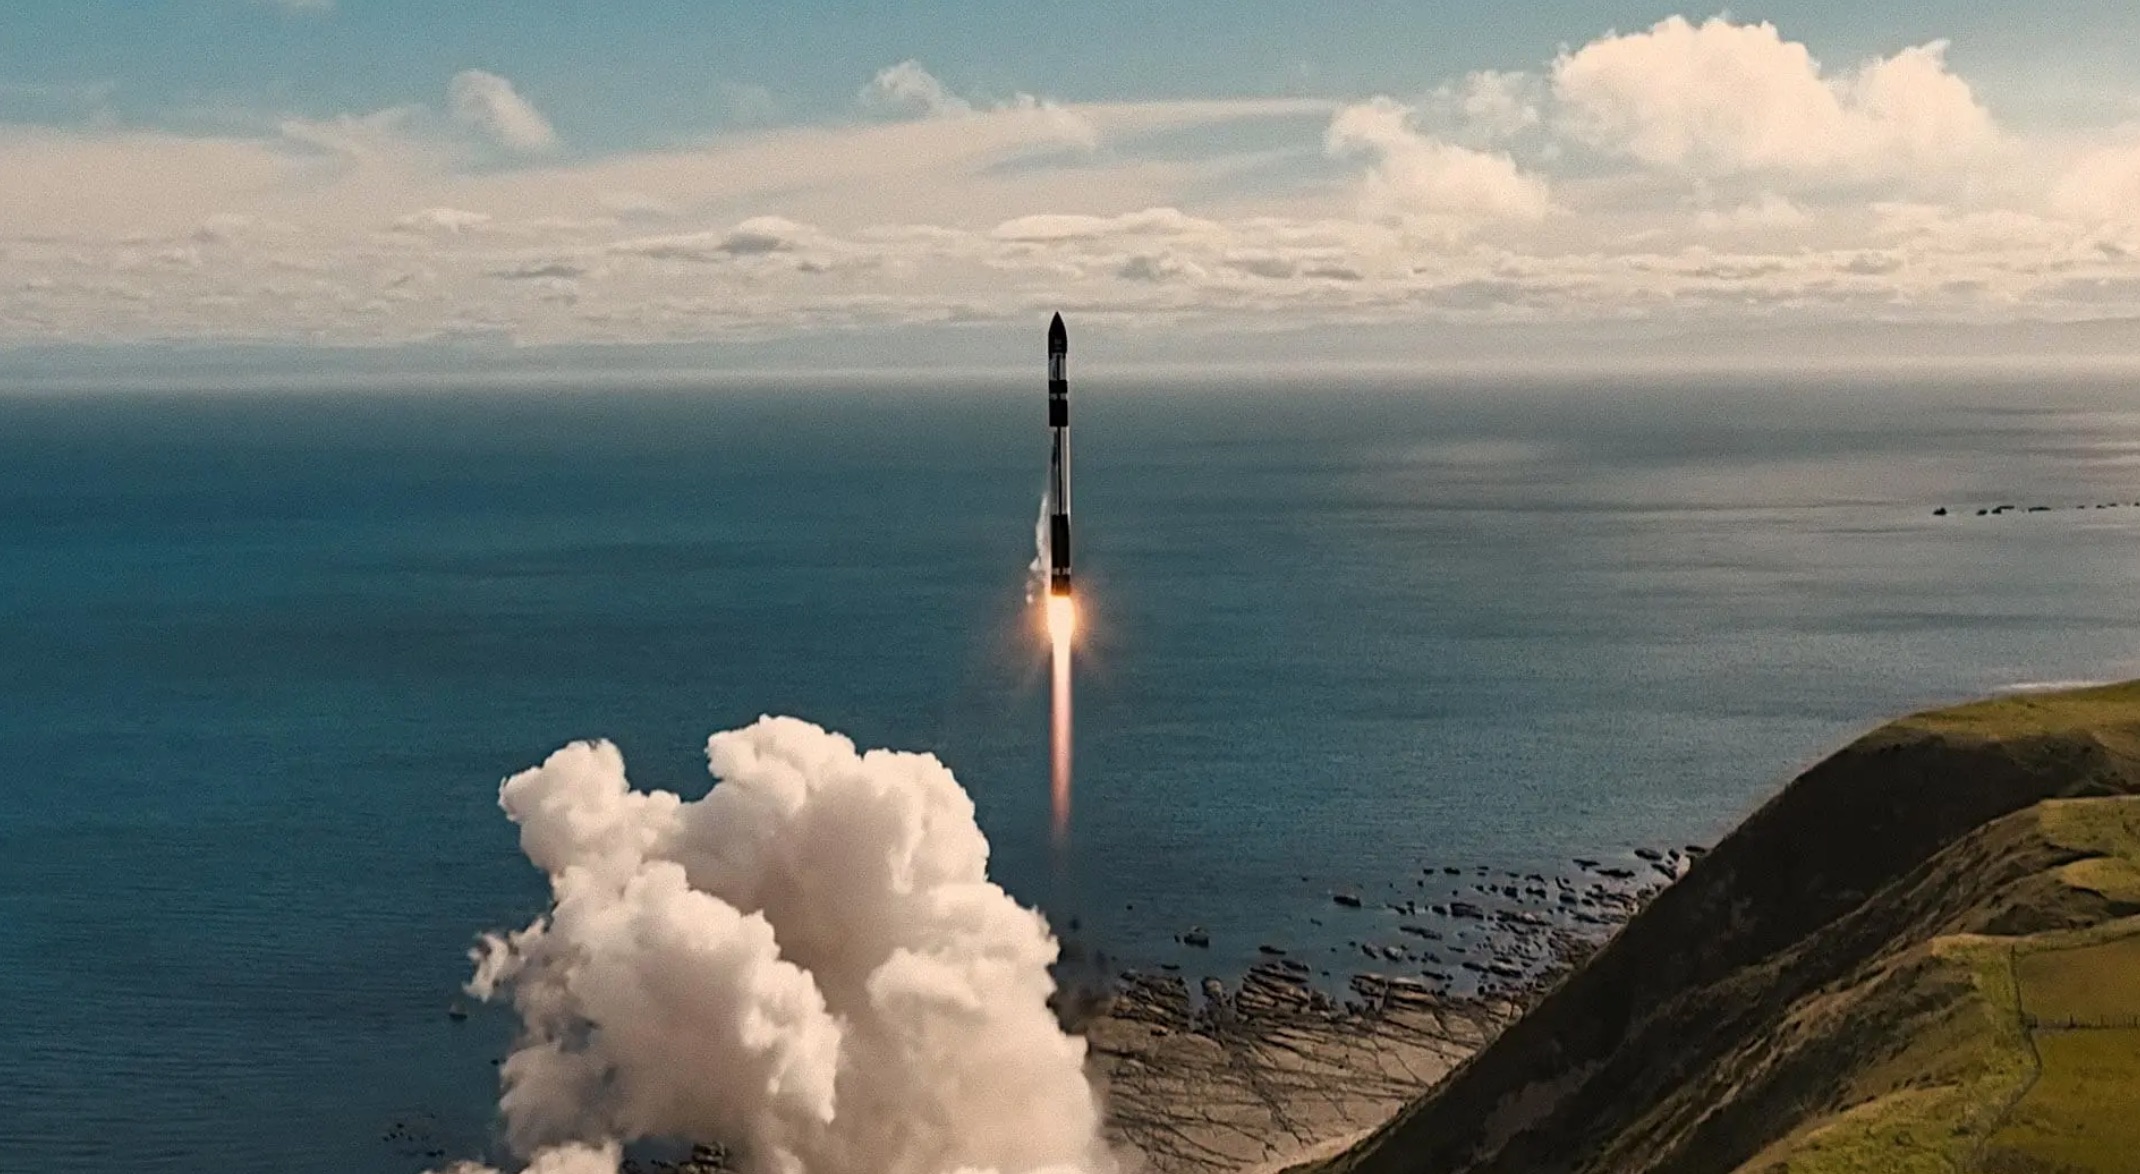  HBO's 'Wild Wild Space' provides an inside look at the private space race (review) 